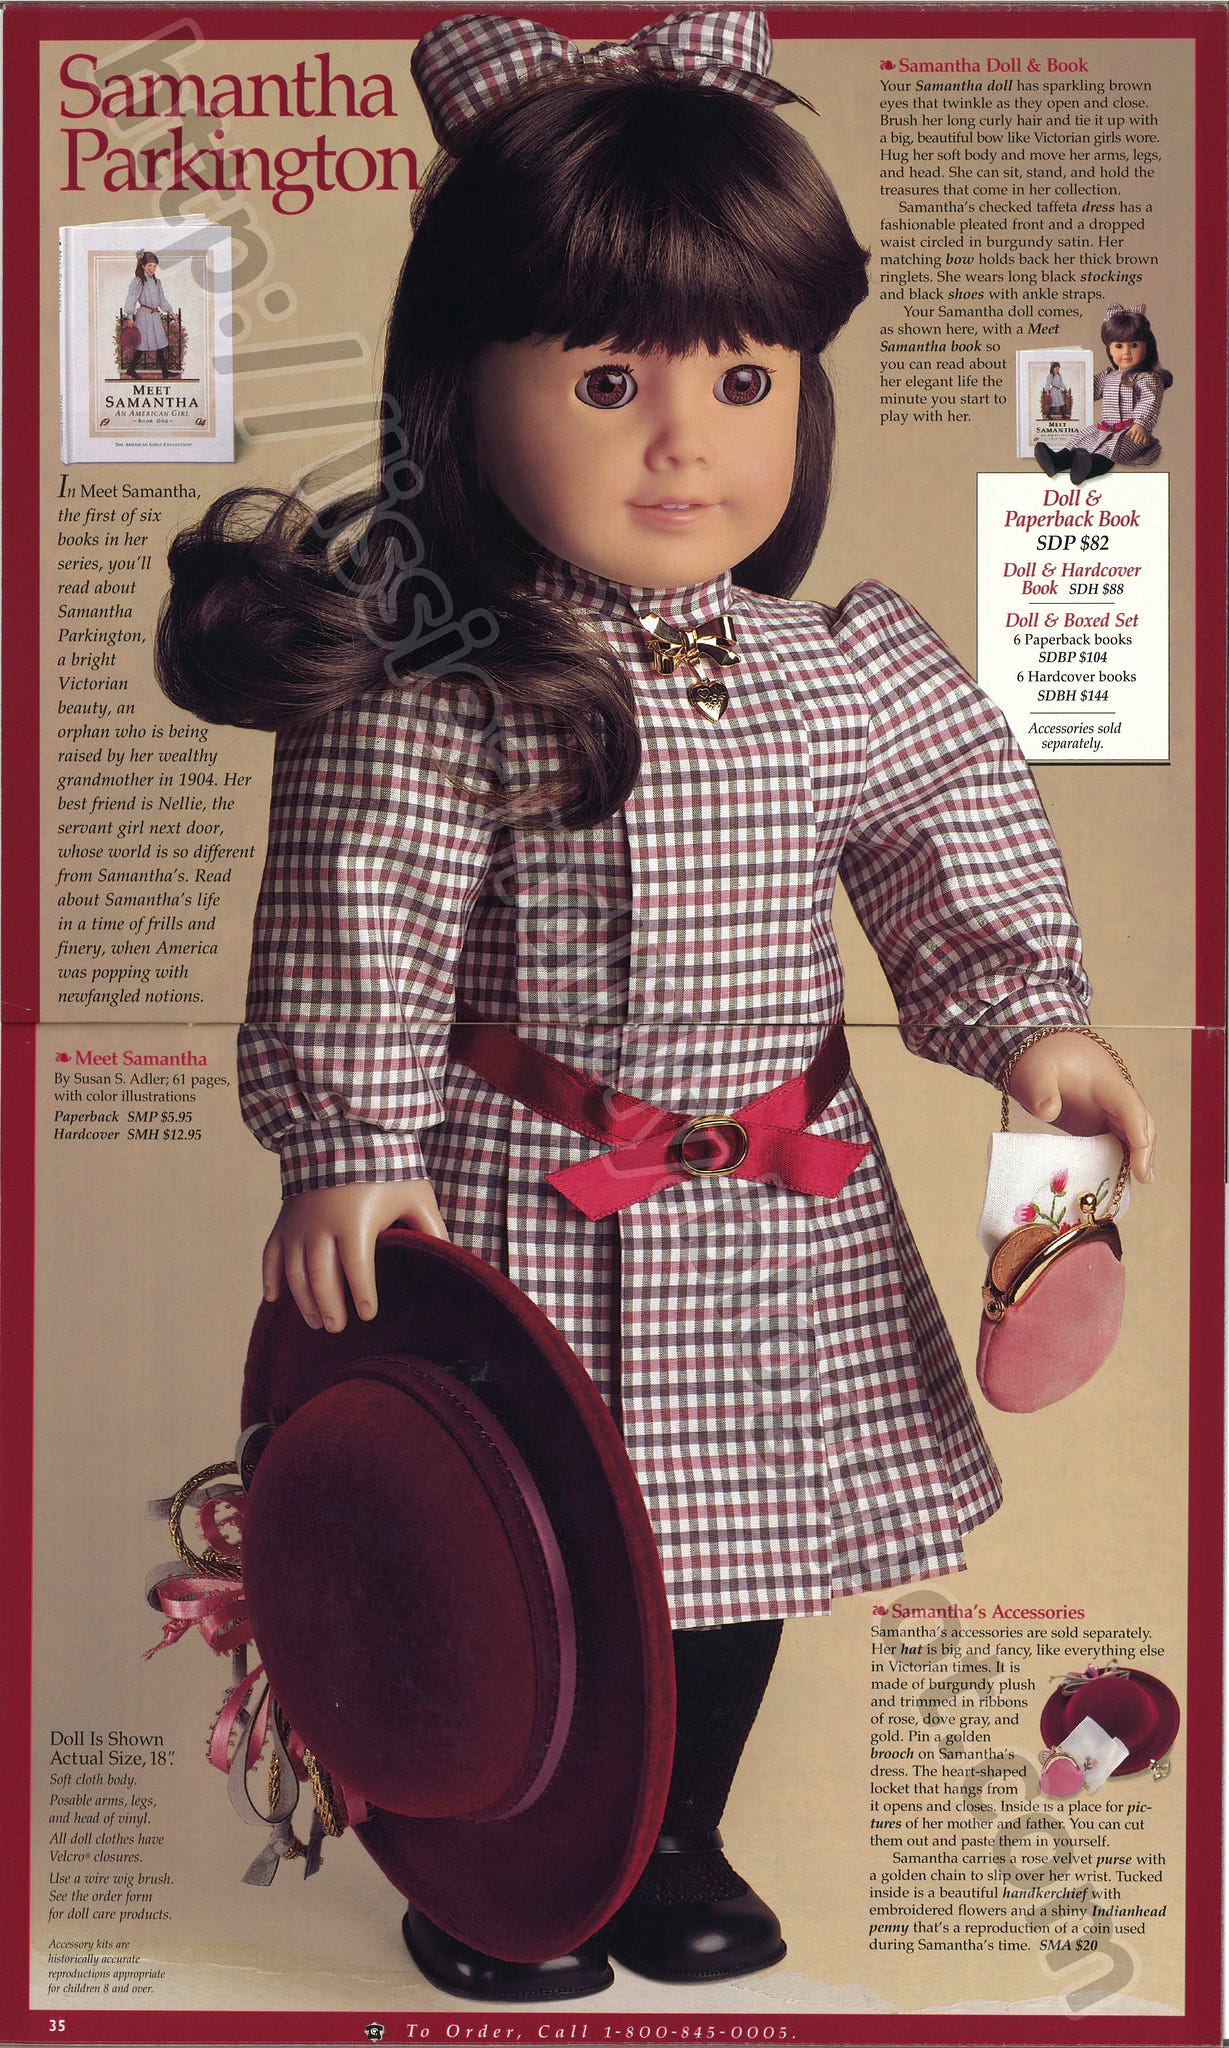 American Girl Dolls a favorite collectible of millennials